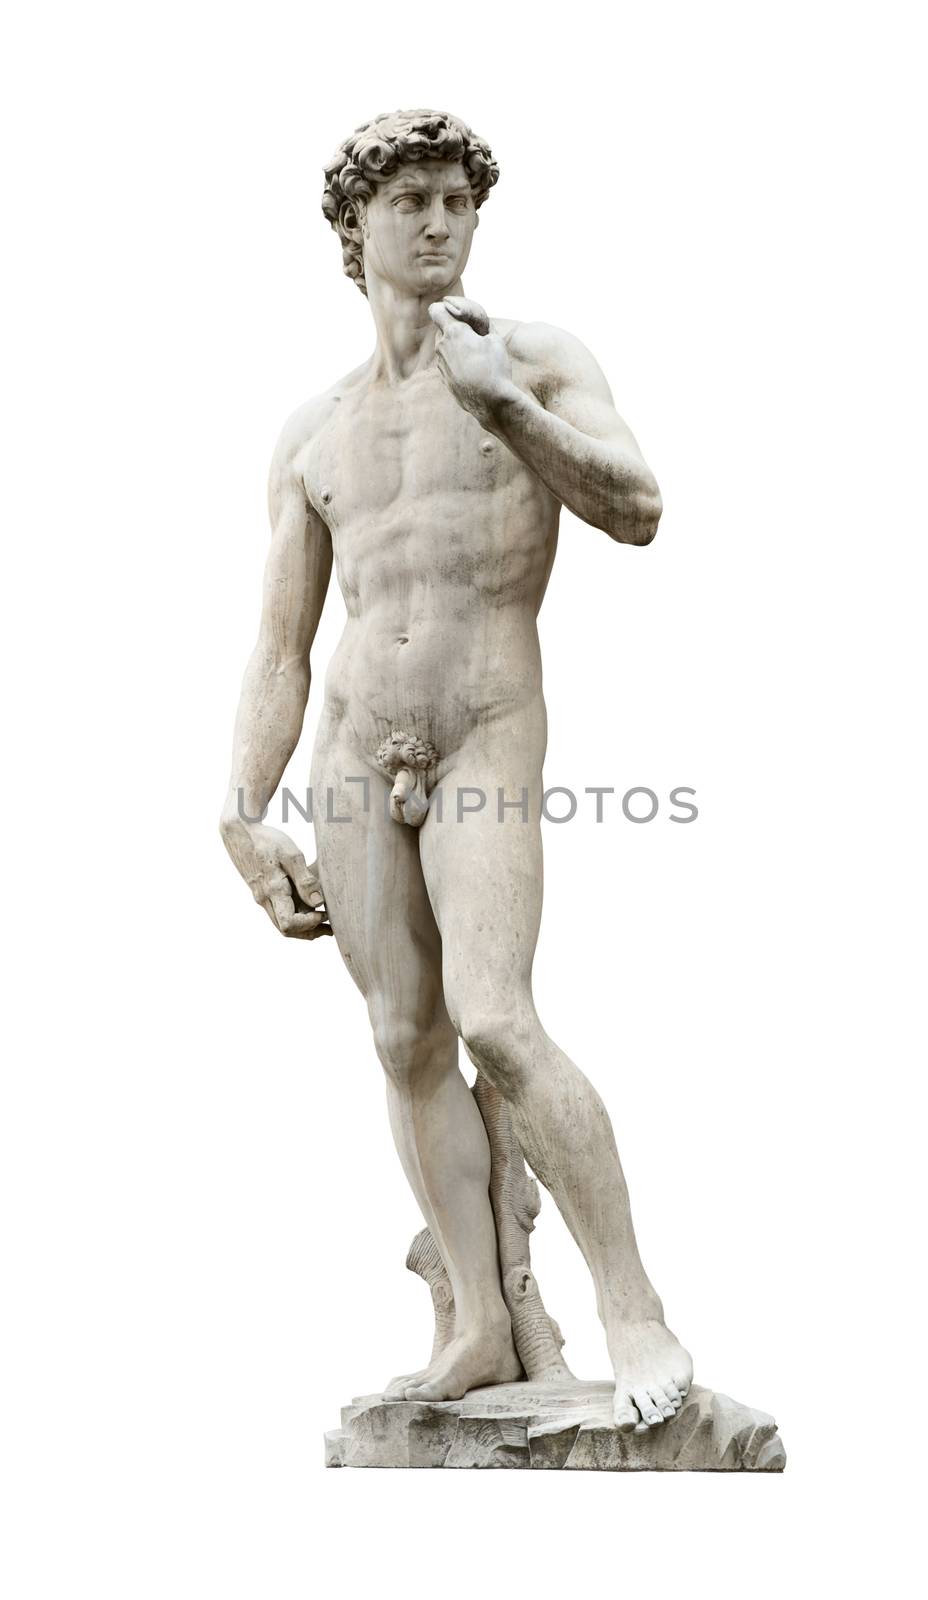 David statue by ancient sculptor Michelangelo isolated on white with clipping path. This replica replaced original in 1910 on Piazza Della Signoria nearby Palazzo Vecchio in Florence, Italy.